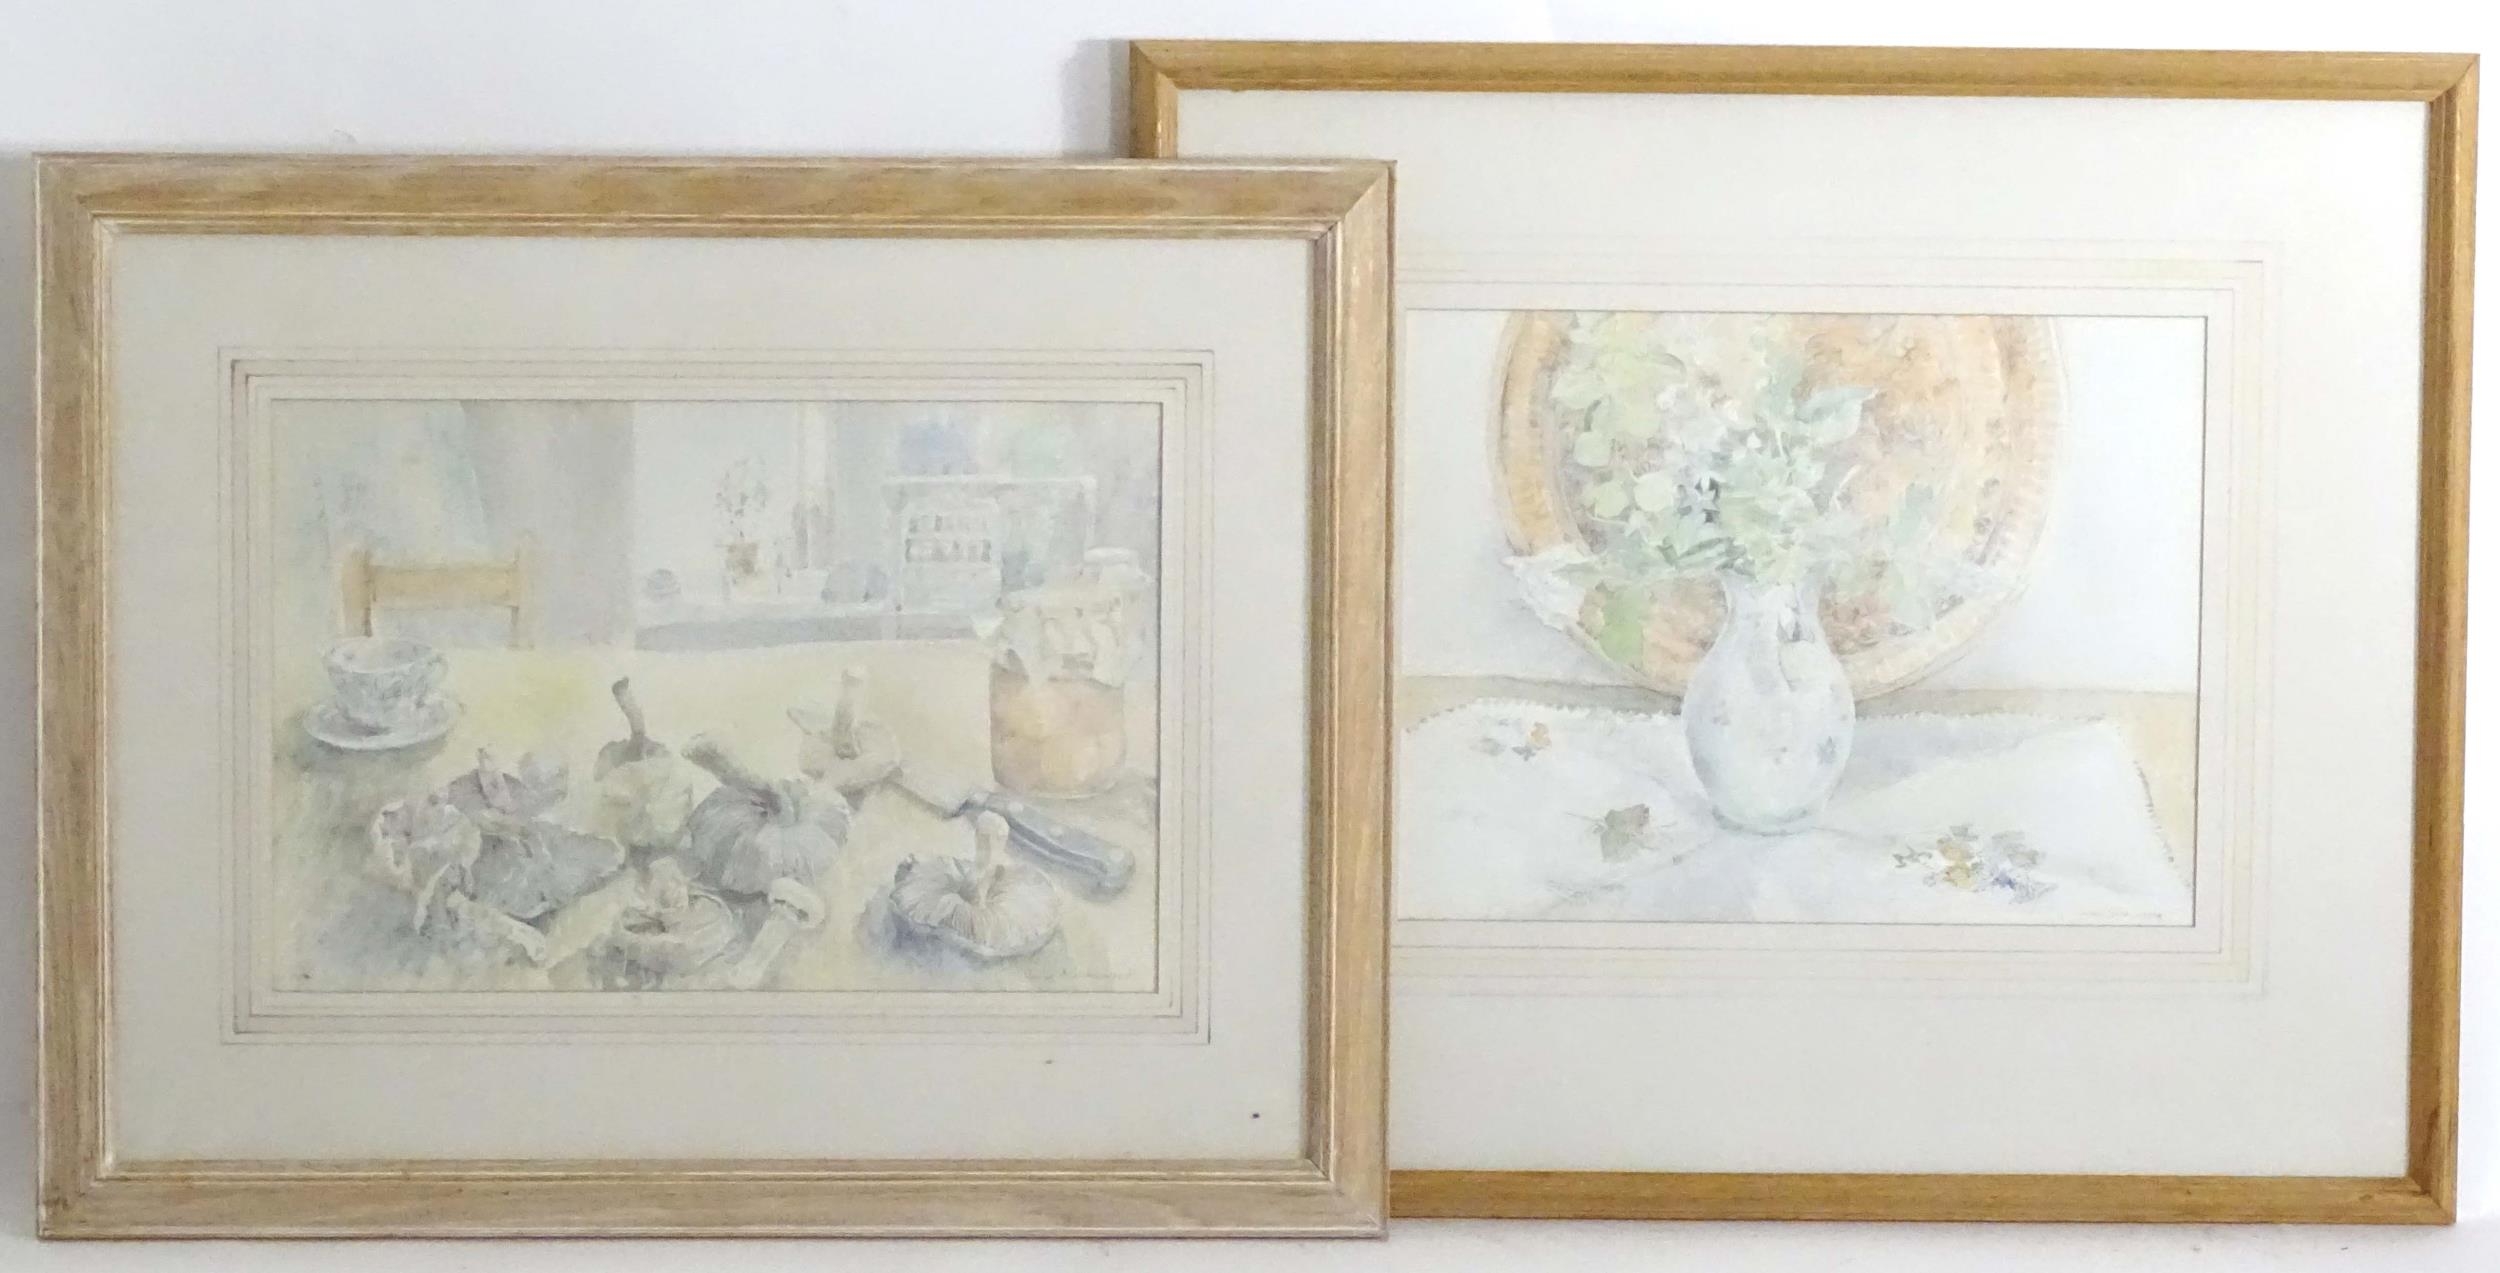 Julia A. Greenwood, 20th century, Watercolours, Two still life studies, one depicting a base of - Image 3 of 7